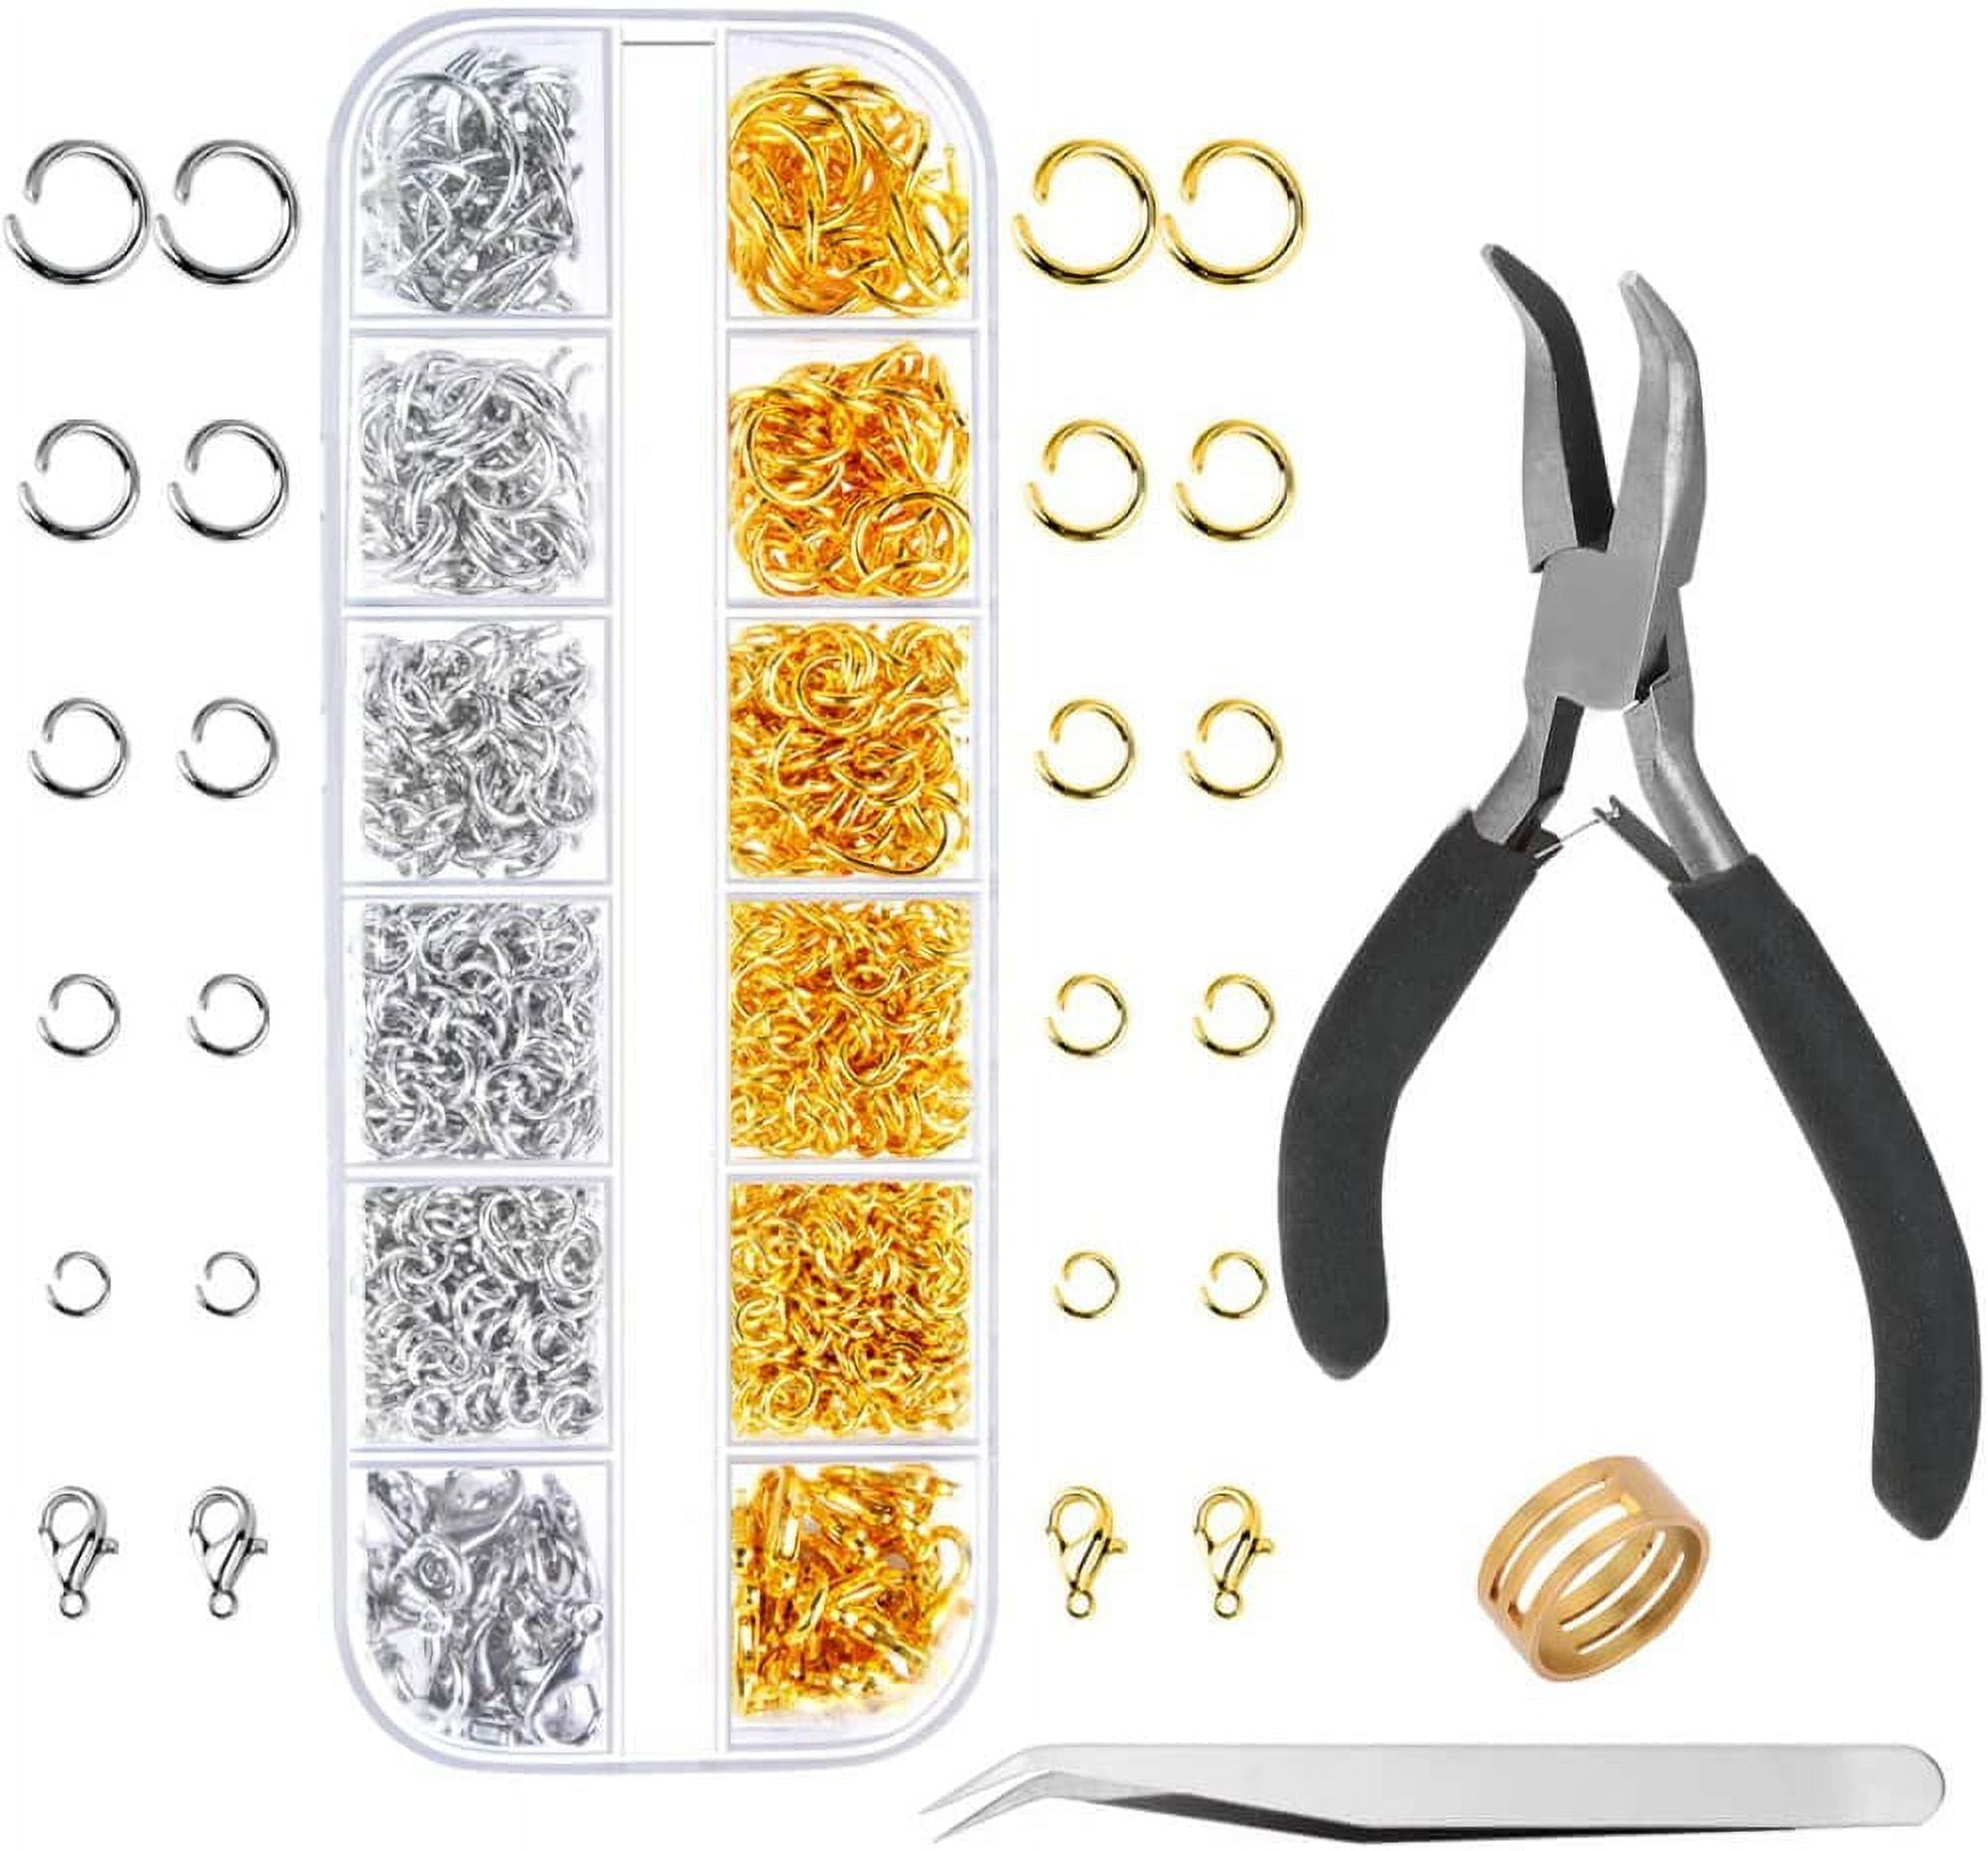 anezus Jewelry Repair Kit with Jewelry Pliers, Jewelry Making Tools,  Beading String and Jewelry Making Supplies for Jewelry Repair, Jewelry  Making and Beading : Arts, Crafts & Sewing 